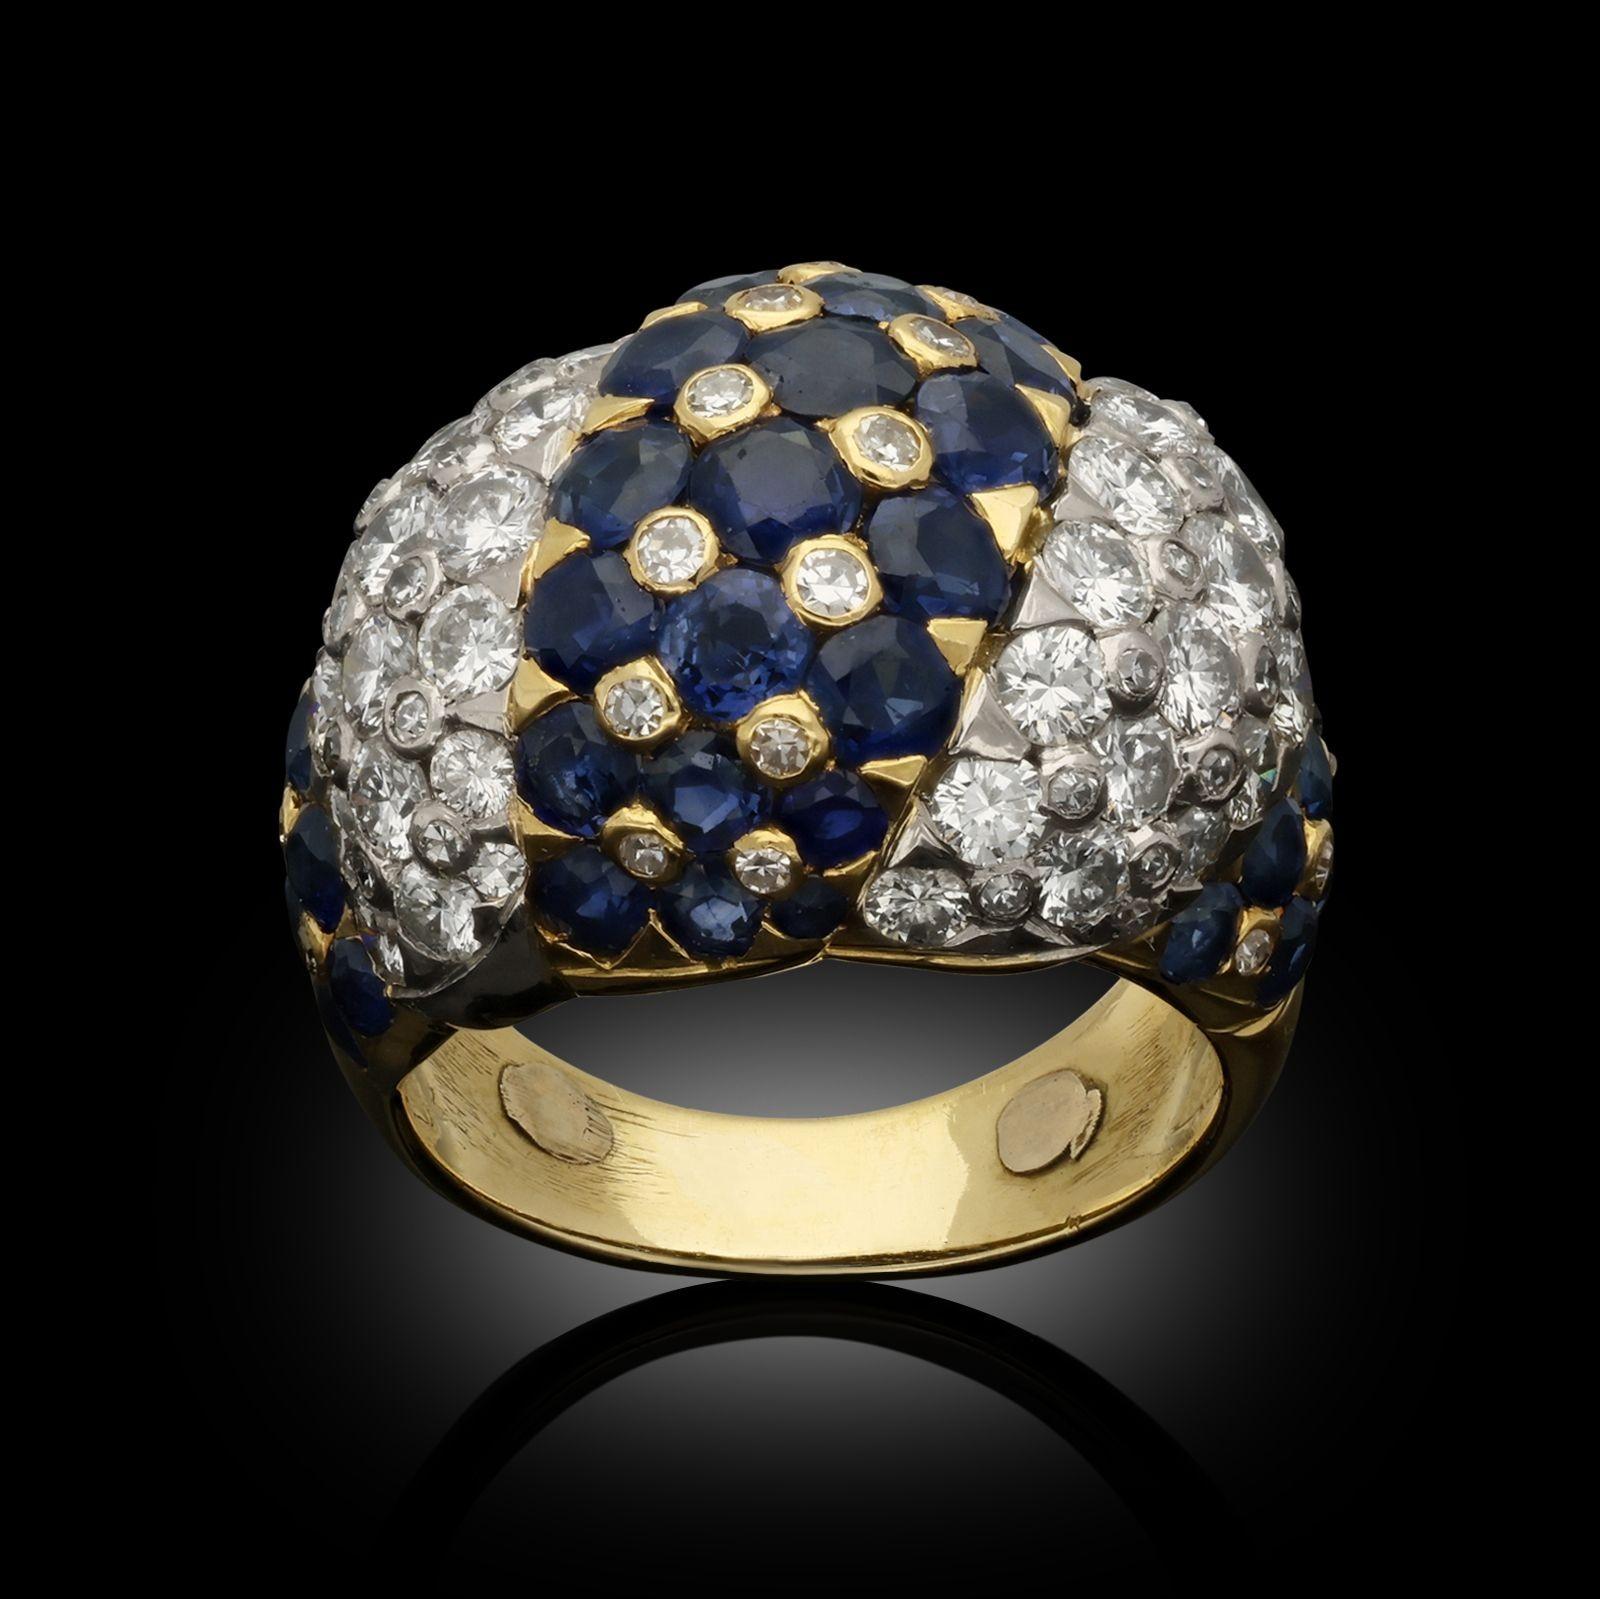 Brilliant Cut Jewelry & Watches > Rings > Dome Rings For Sale